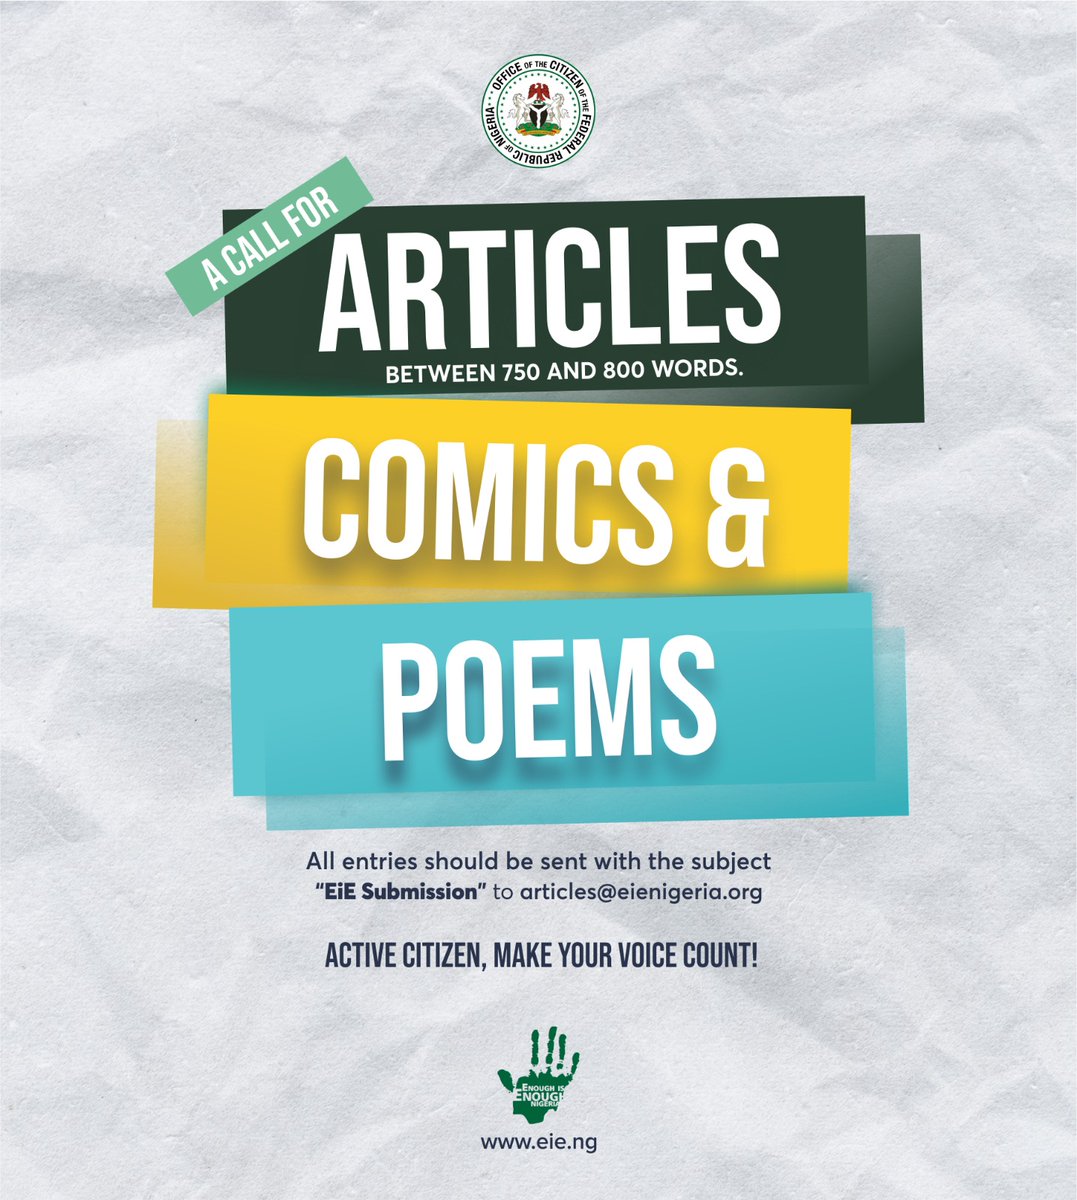 Writers & artists, share your voice on Good Governance, Public Accountability, Active Citizenship & Democracy! Submit articles, comics & poems to articles@eienigeria.org for our featured series. Let your creativity shine a light on these critical issues. #OfficeOfTheCitizen